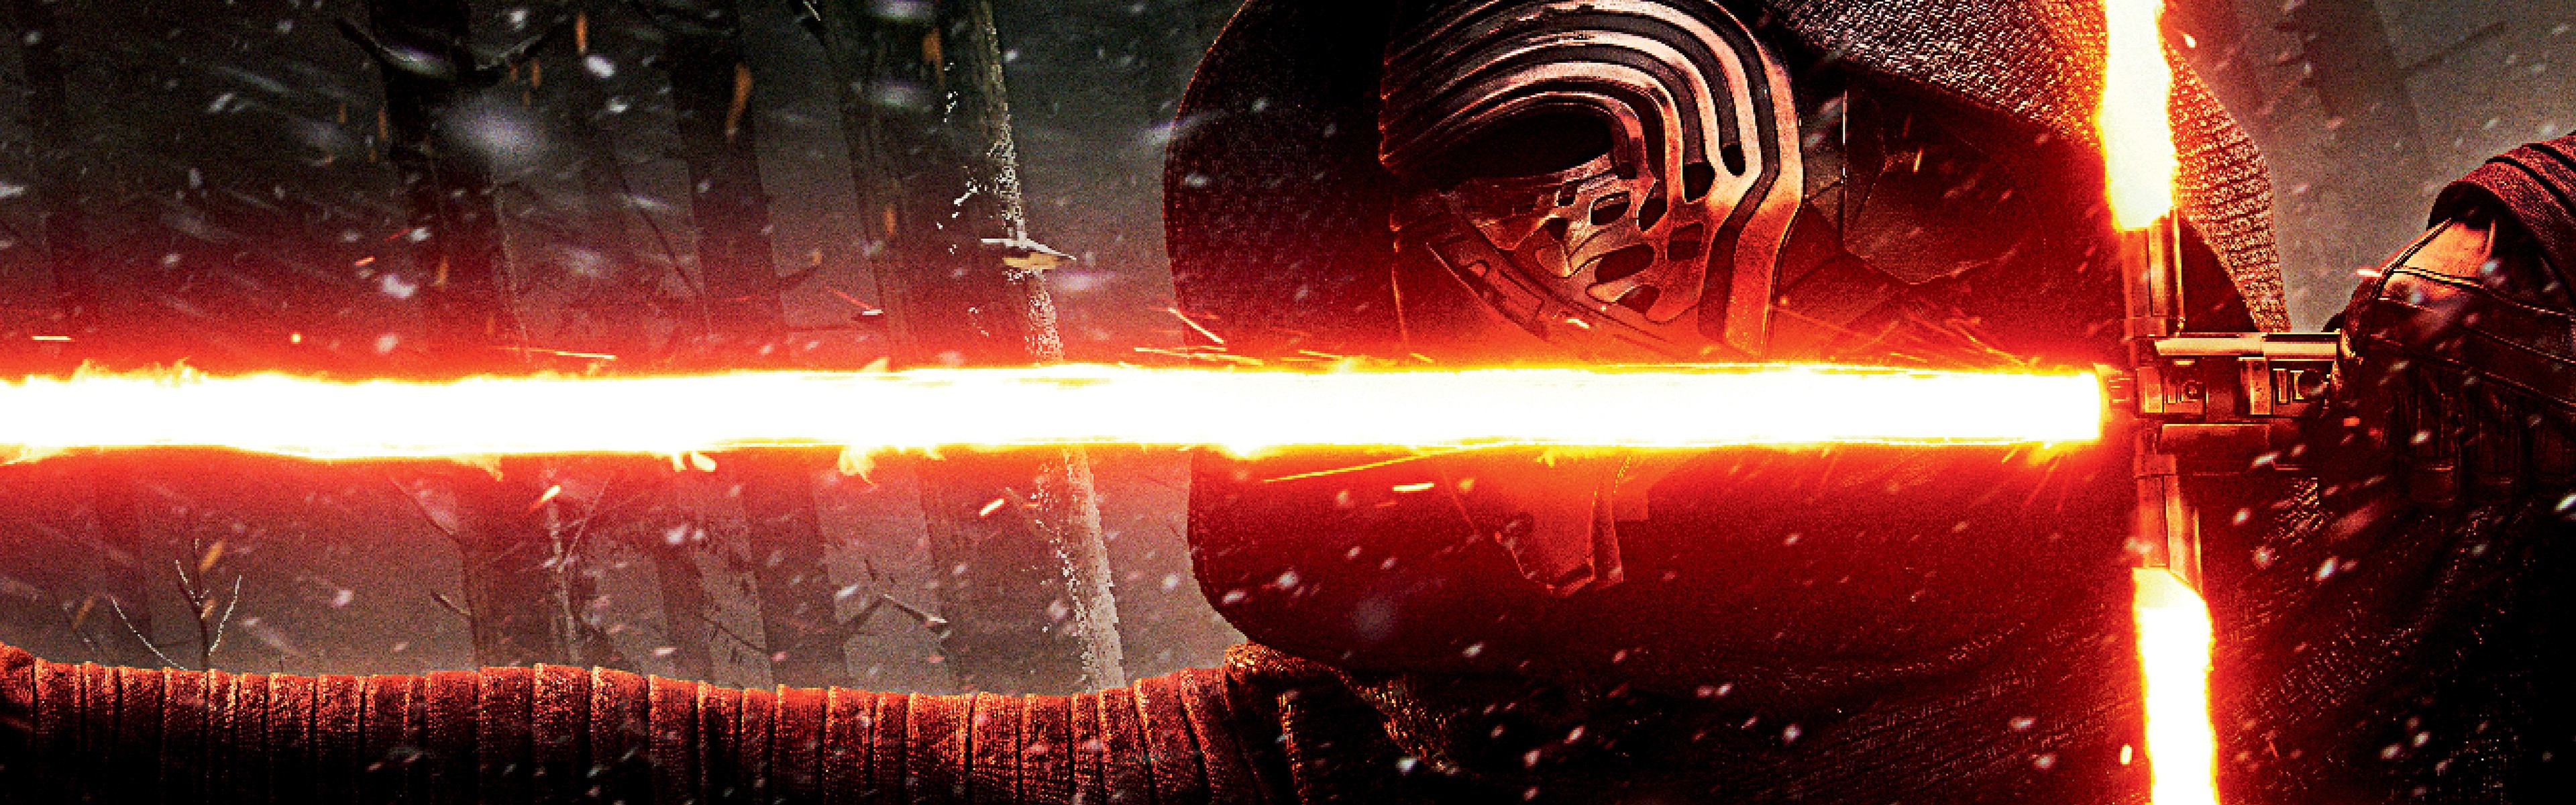 Kylo Ren Lightsaber Star Wars The Force Awakens Movies Wallpapers Hd Desktop And Mobile